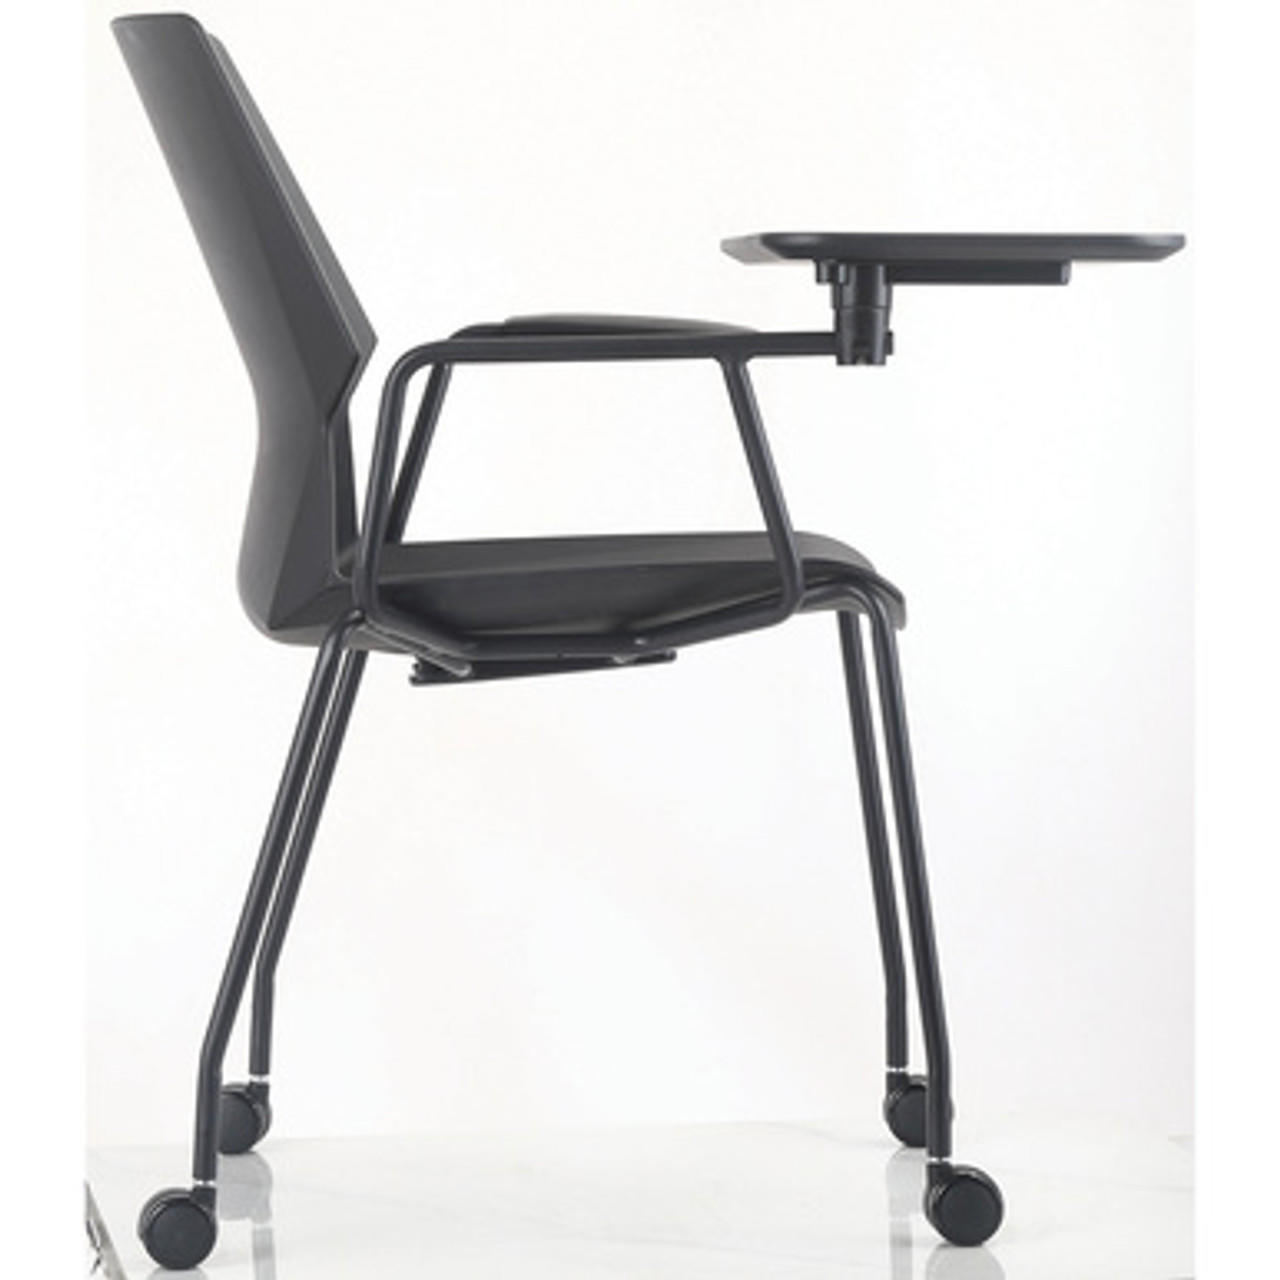  Office Source Scholar Collection Mobile Training Room Chair with Tablet Arm and Casters 08AF1MMT 